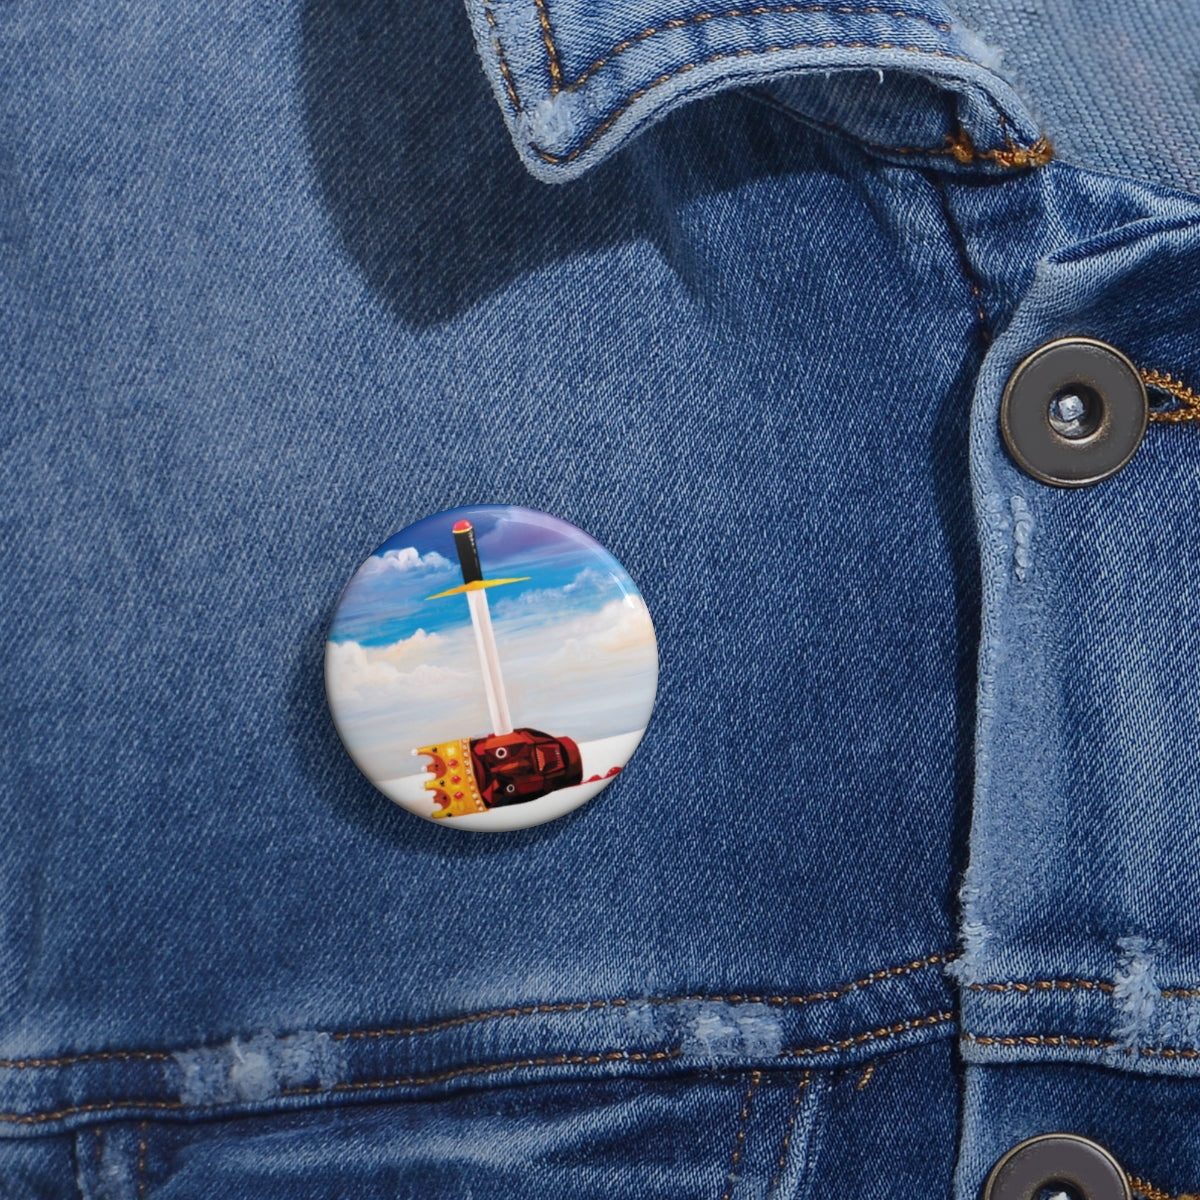 Kanye West inspired Dark Twisted Fantasy Pin Buttons-Archethype